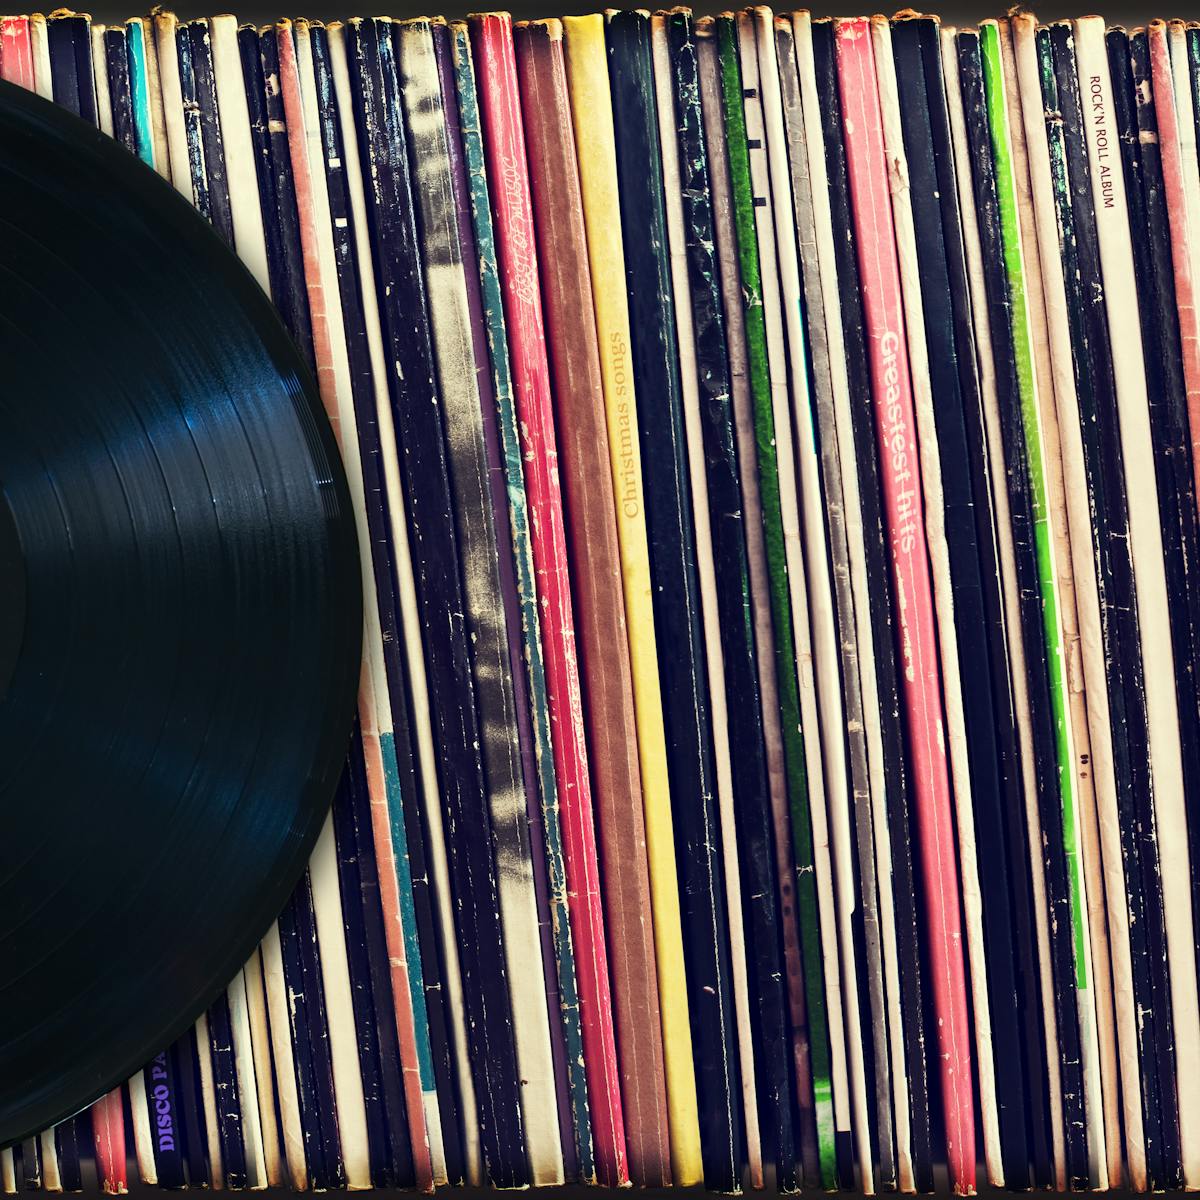 Back on record – the reasons behind vinyl's unlikely comeback